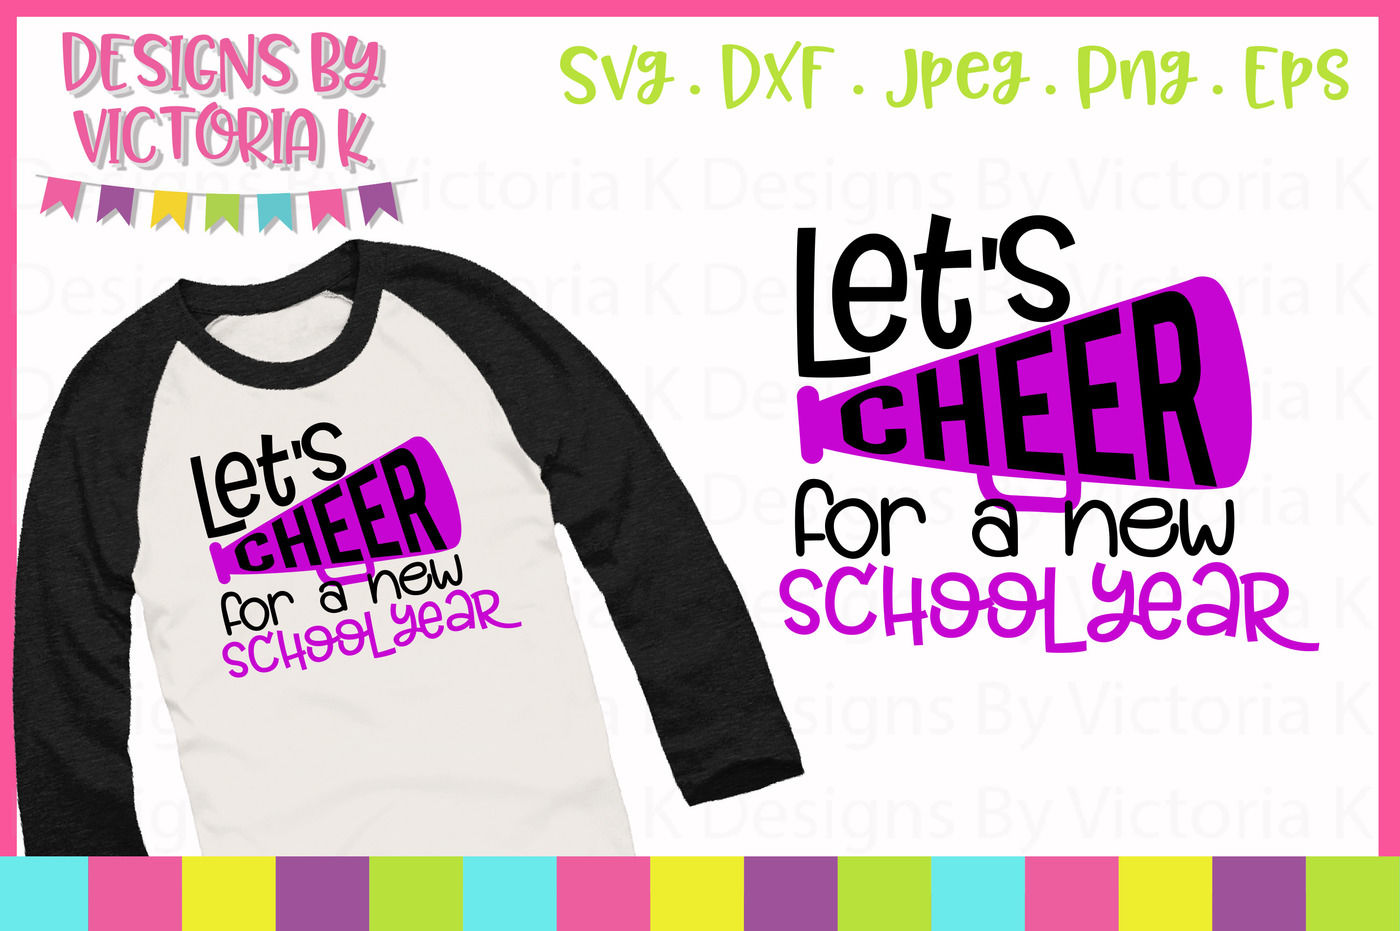 ori 3473216 8dc8030d5eb2de5a3e46f70f4878881d7280cd04 let s cheer for a new school year cut file svg dxf png